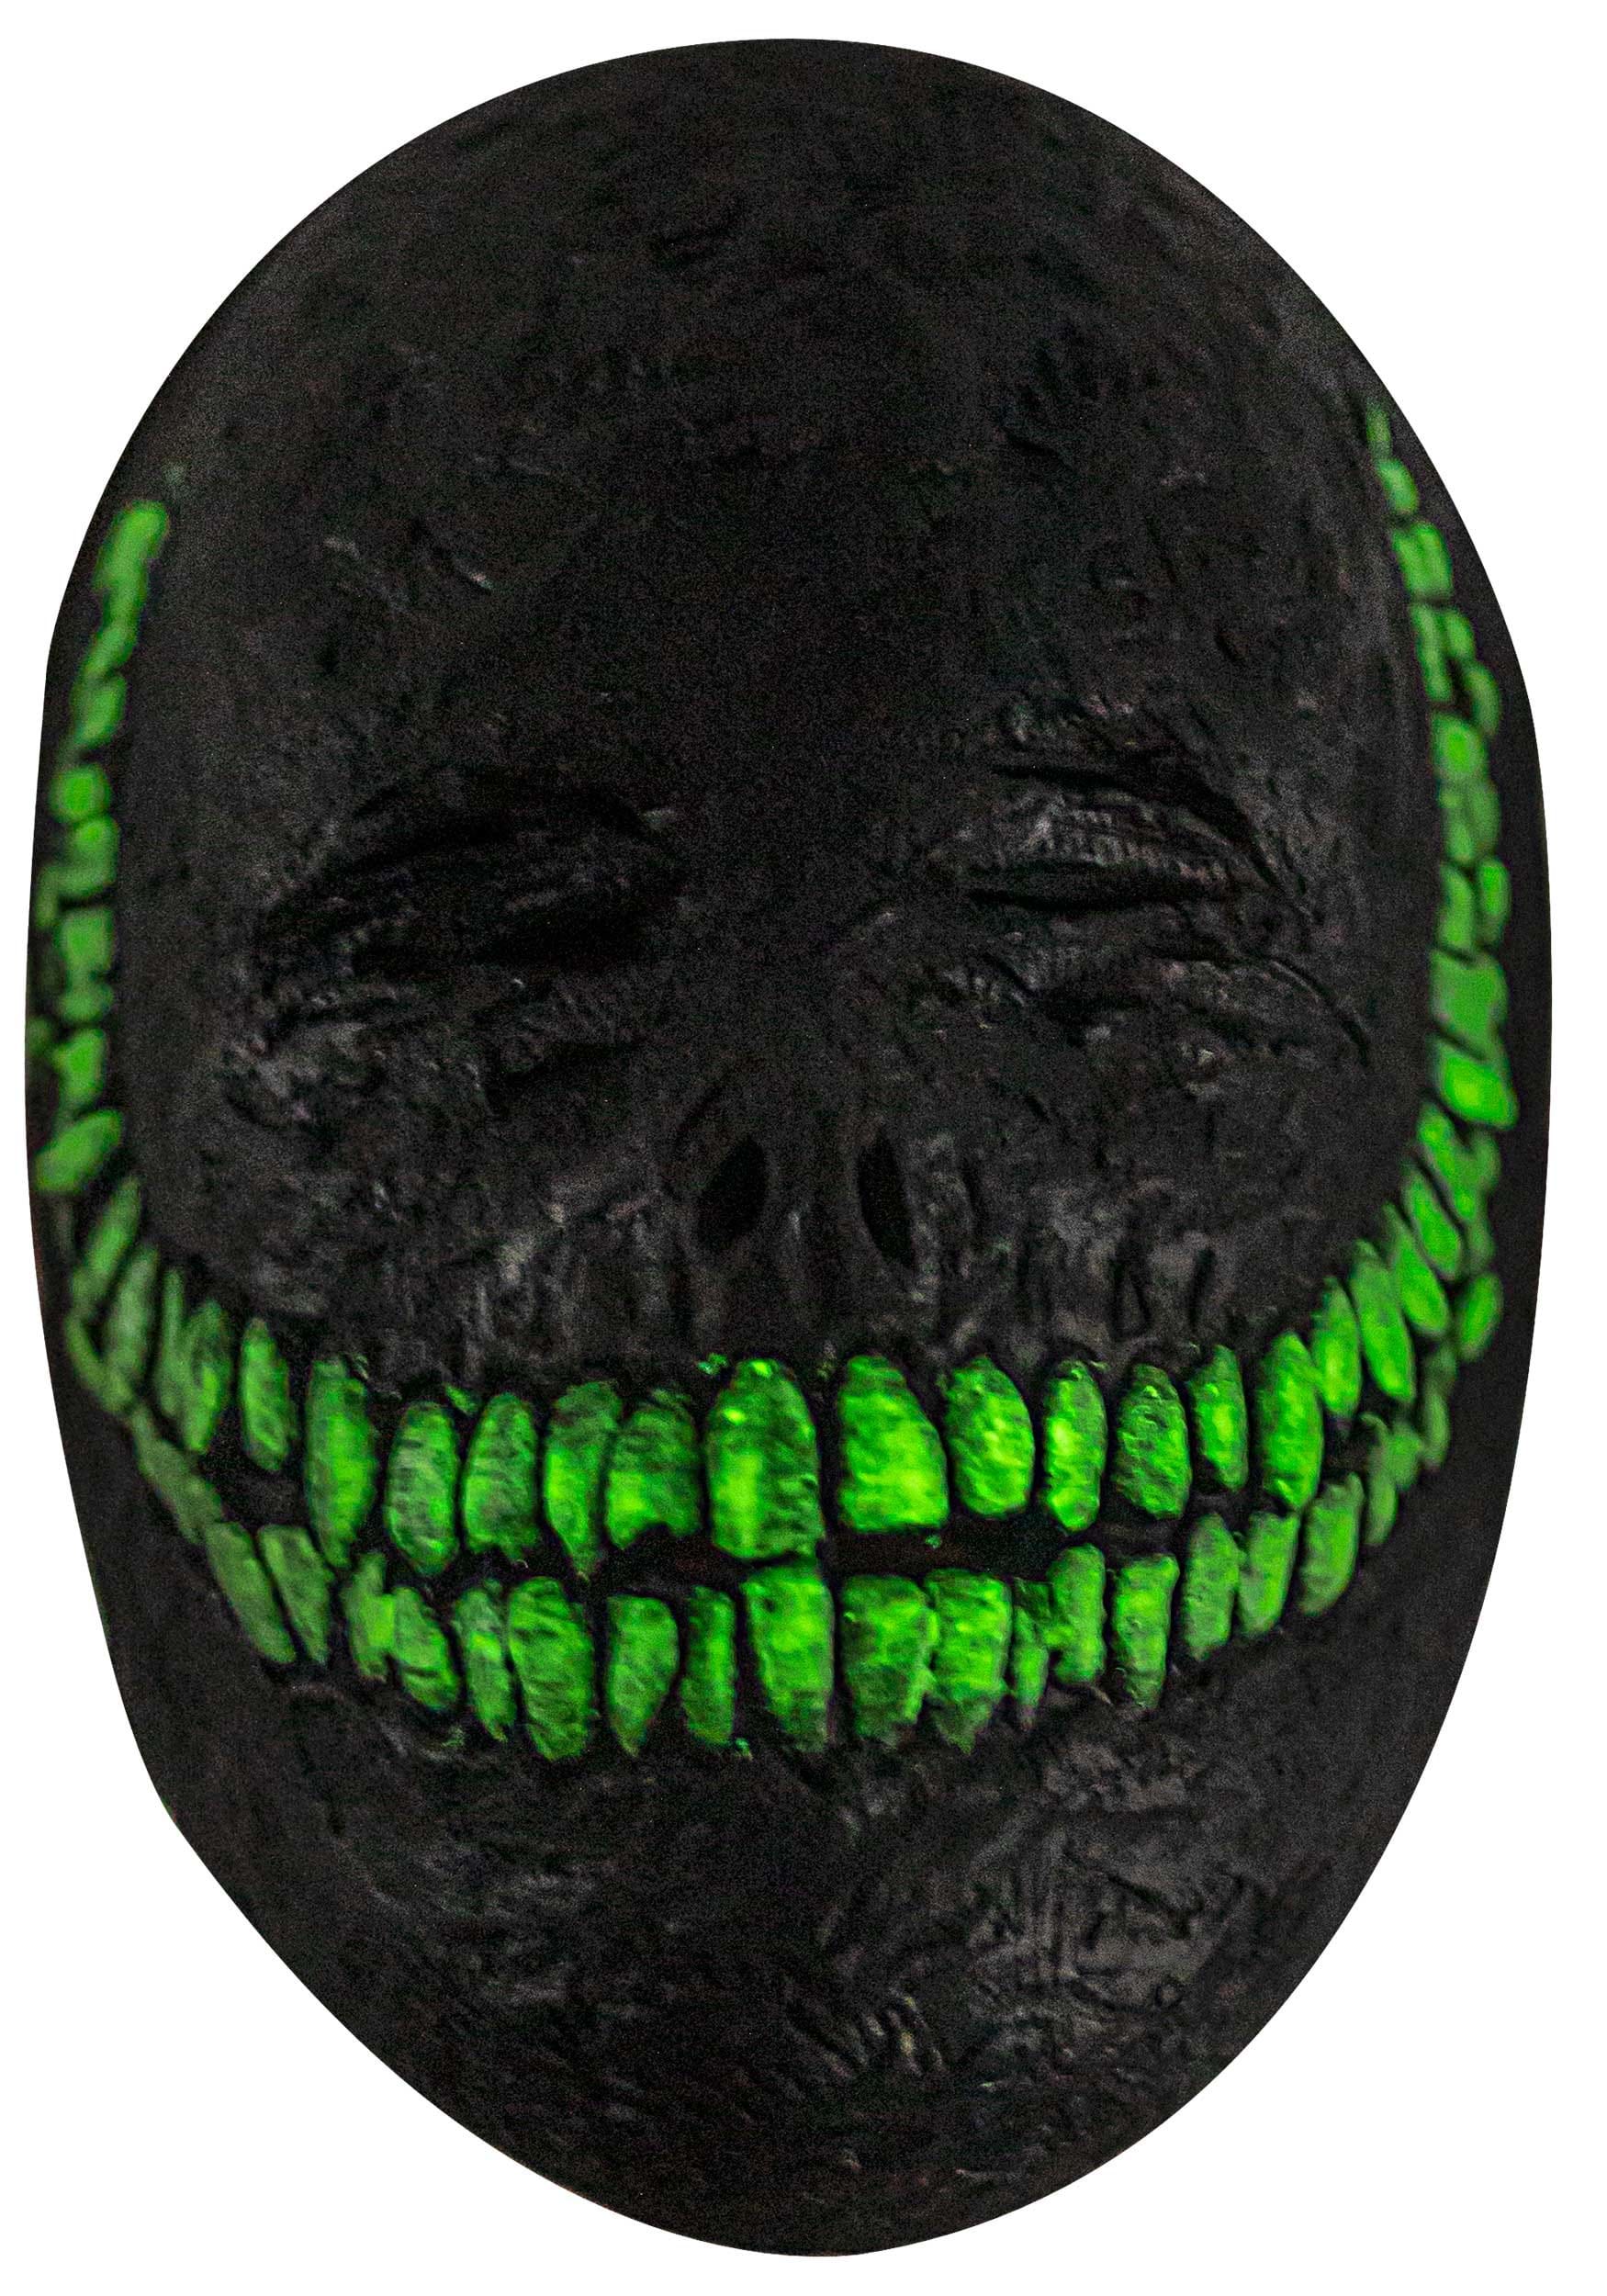 Creepy Grinning Glow in the Dark Mask